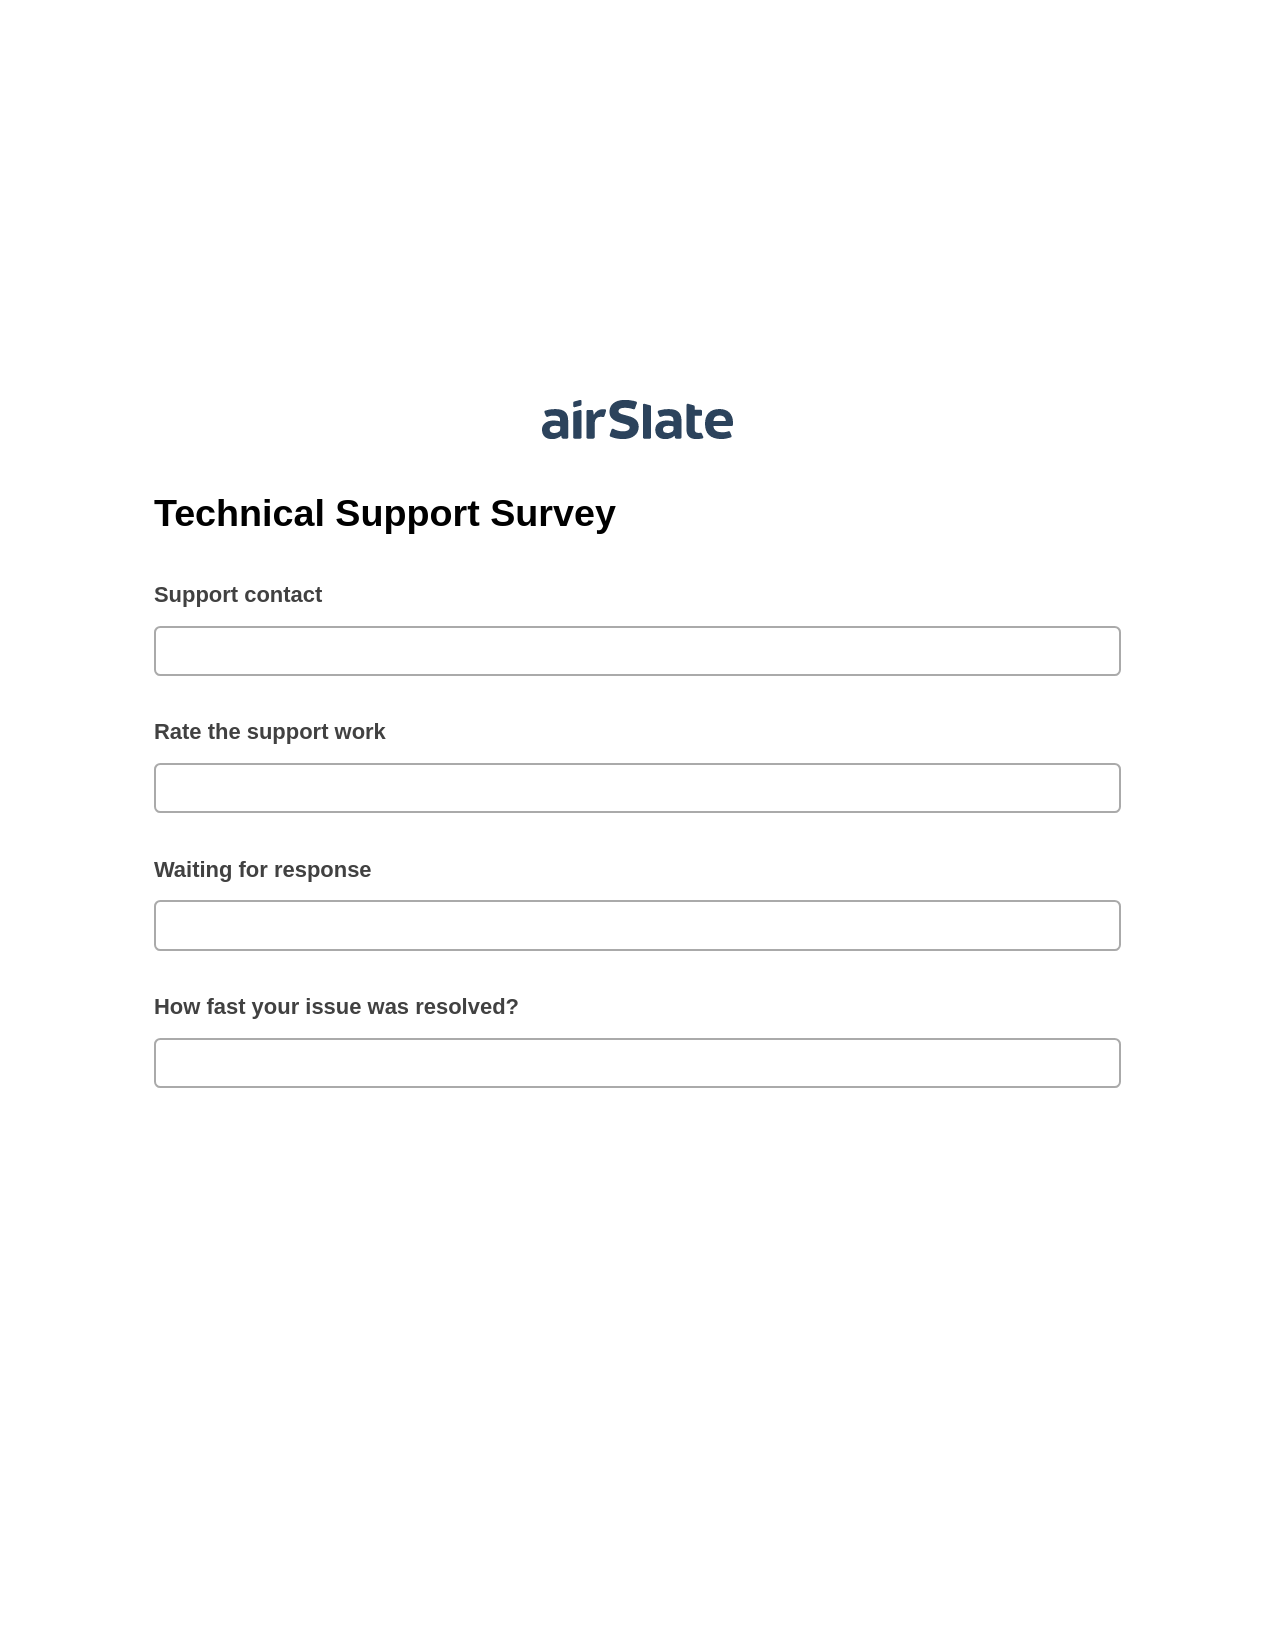 Multirole Technical Support Survey Pre-fill from Salesforce Records with SOQL Bot, Reminder Bot, Post-finish Document Bot